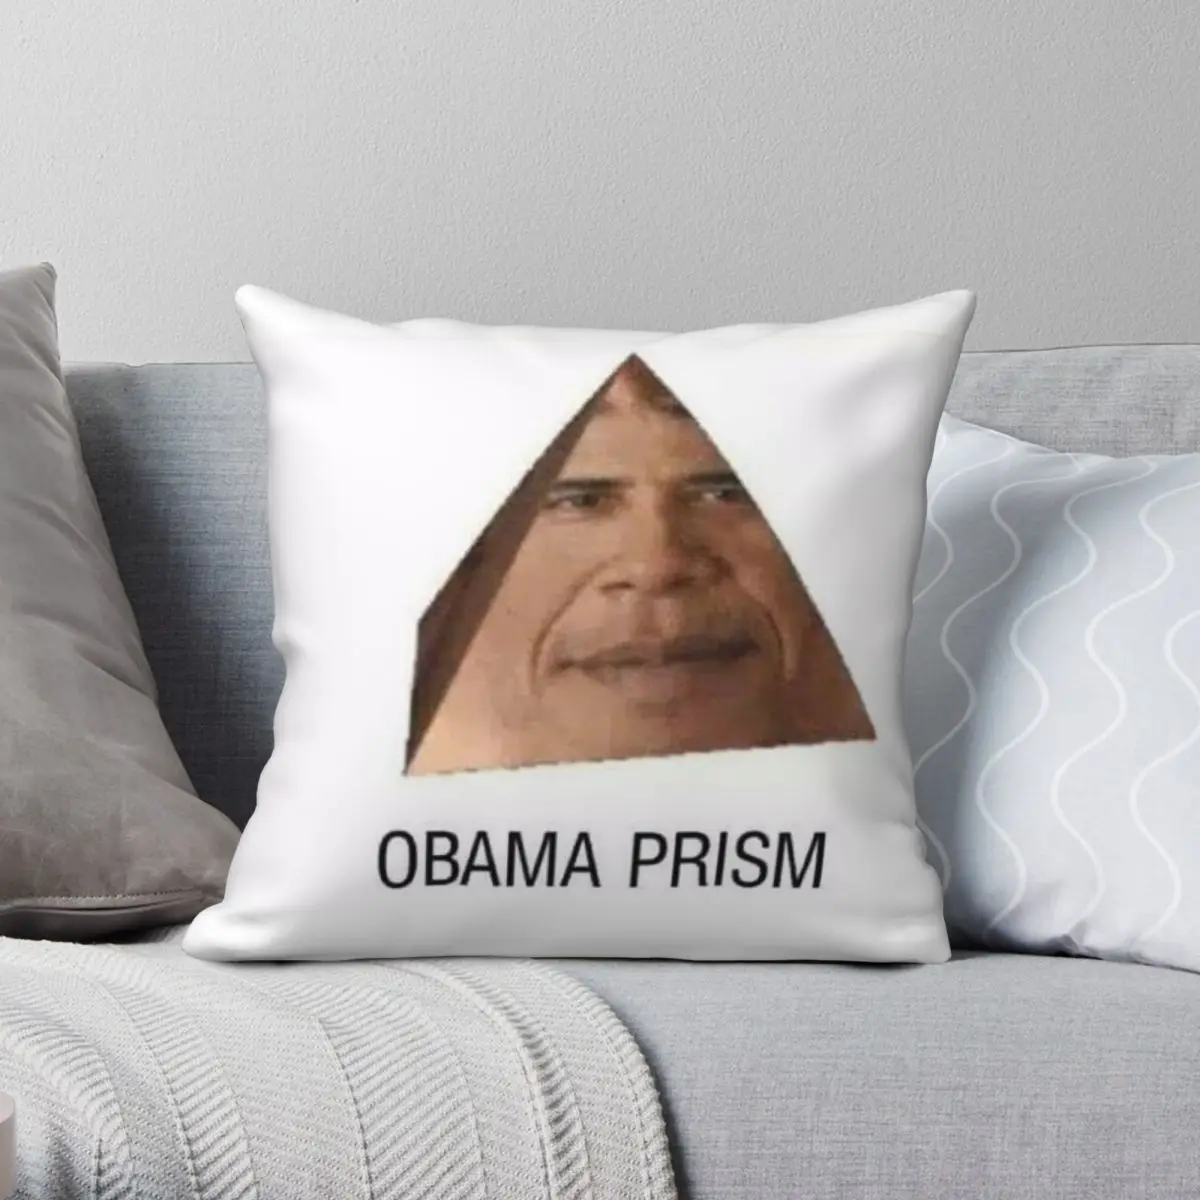 

The Obama Prism Shadow Meme Square Pillowcase Polyester Linen Velvet Printed Zip Decor Pillow Case Bed Cushion Cover